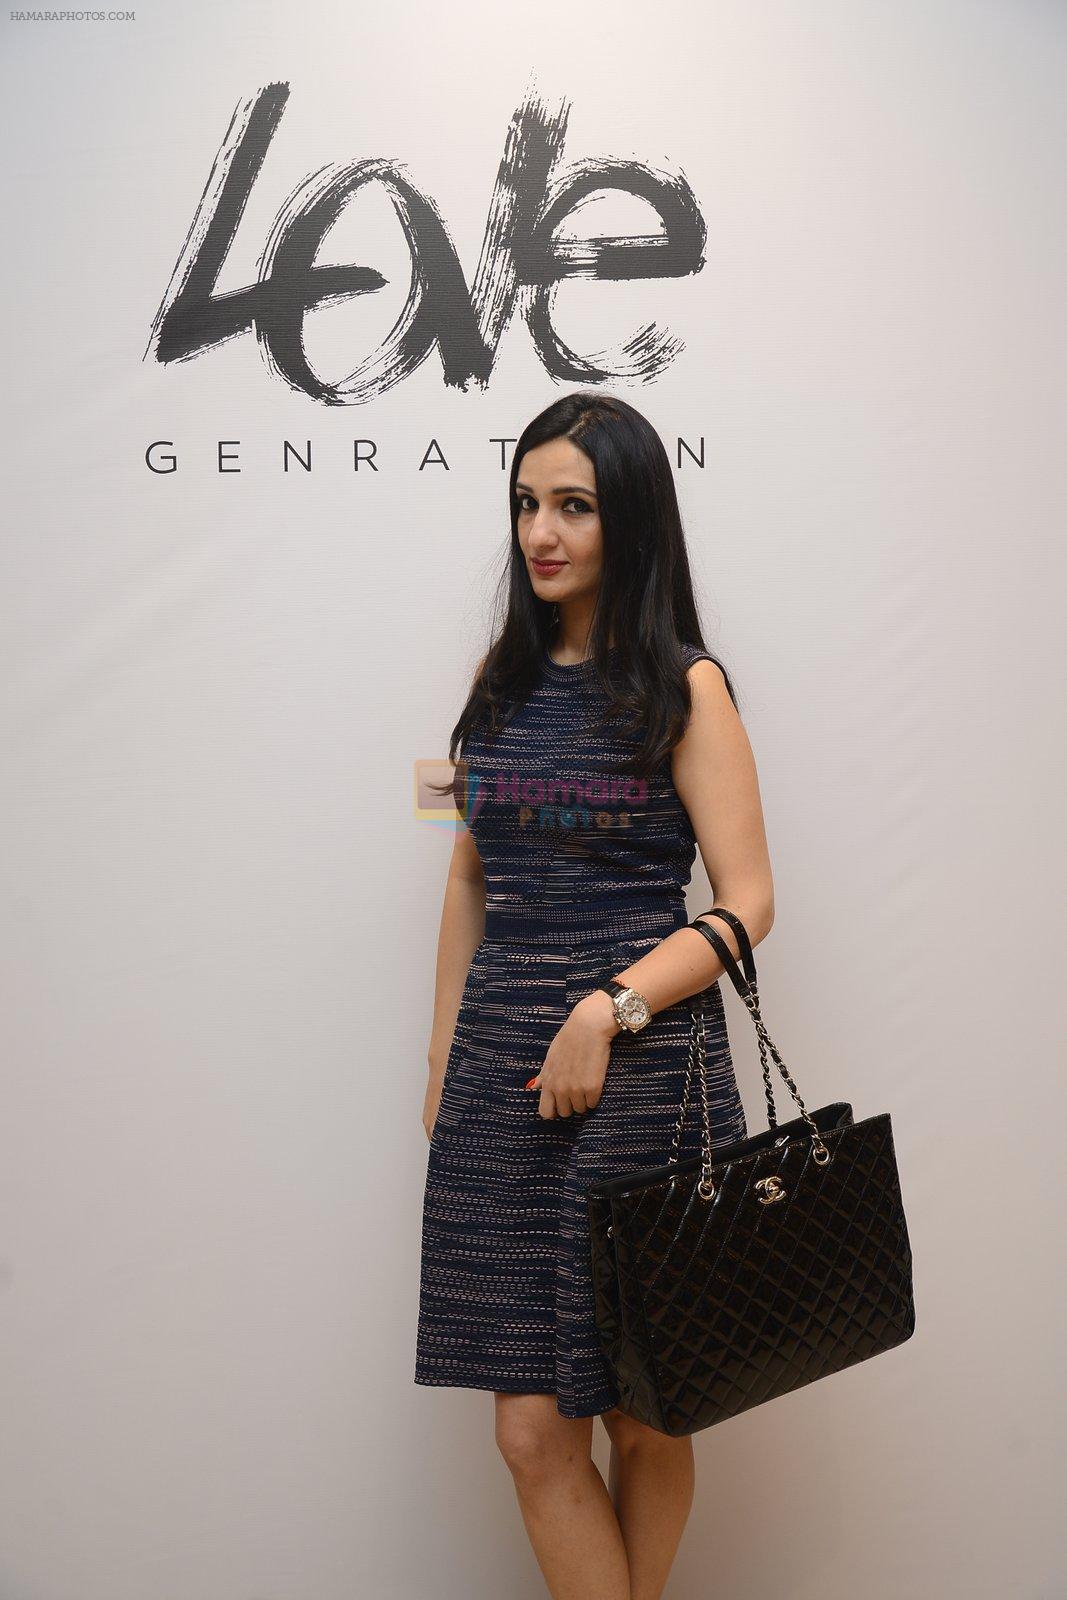 Anu Dewan at Love Generation launch at Shoppers Stop on 7th Oct 2016